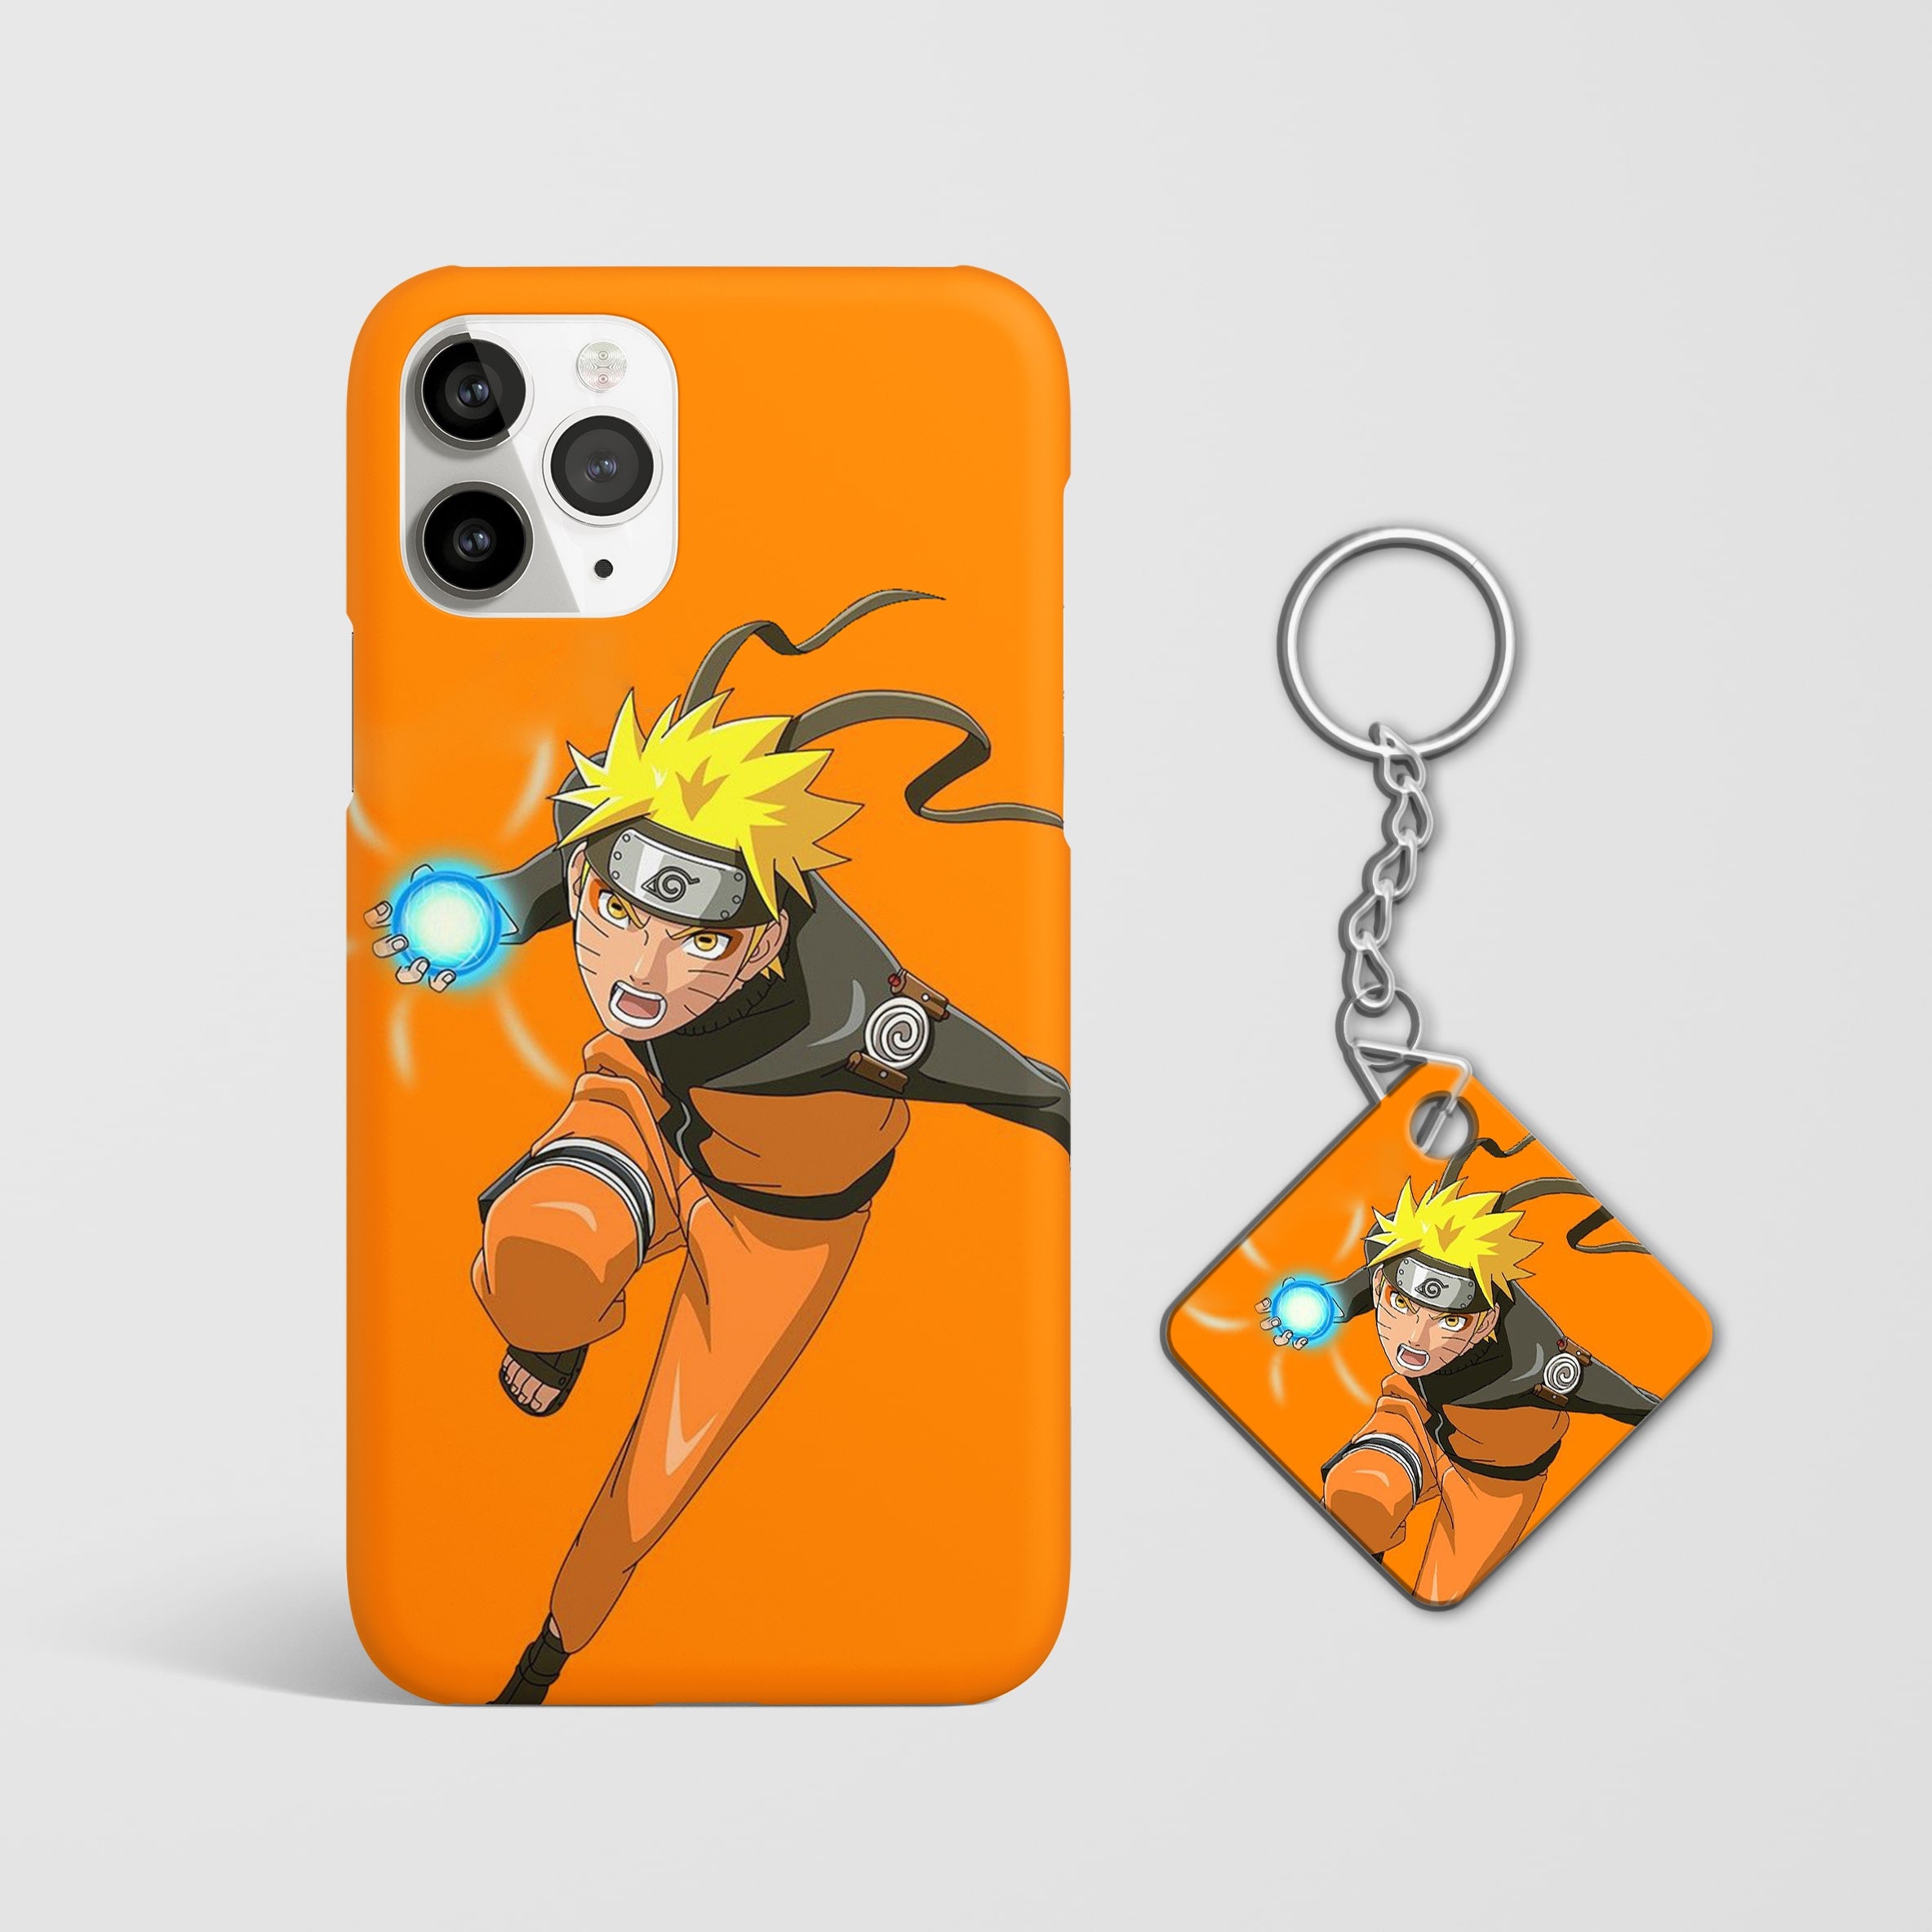 lose-up of the Naruto Rasengan Power Phone Cover, showcasing the detailed 3D matte designwith Keychain.